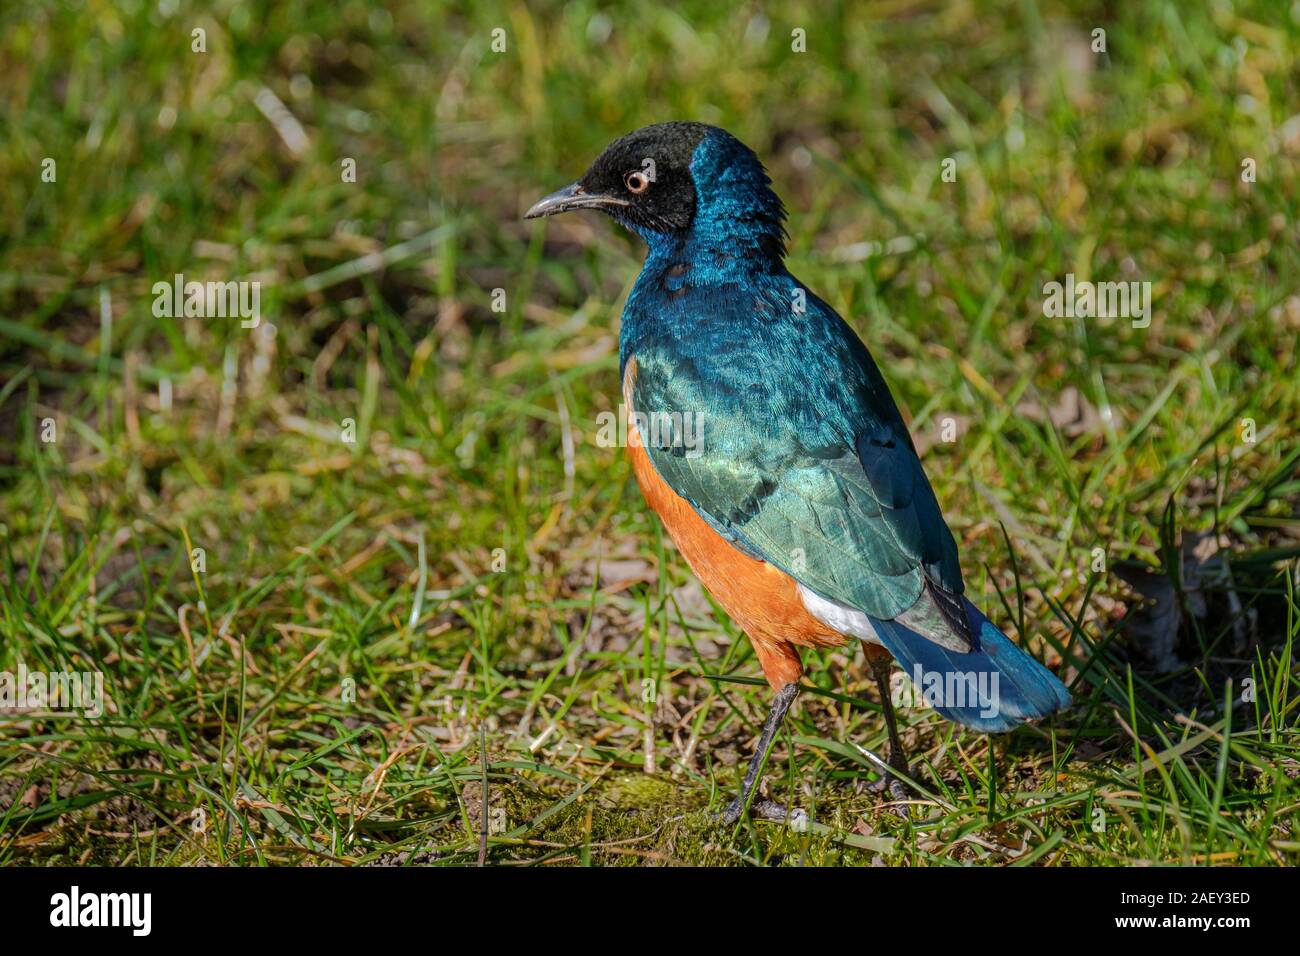 The beautiful and colourful Superb Starling, Lamprotornis superbus, standing in grass Stock Photo